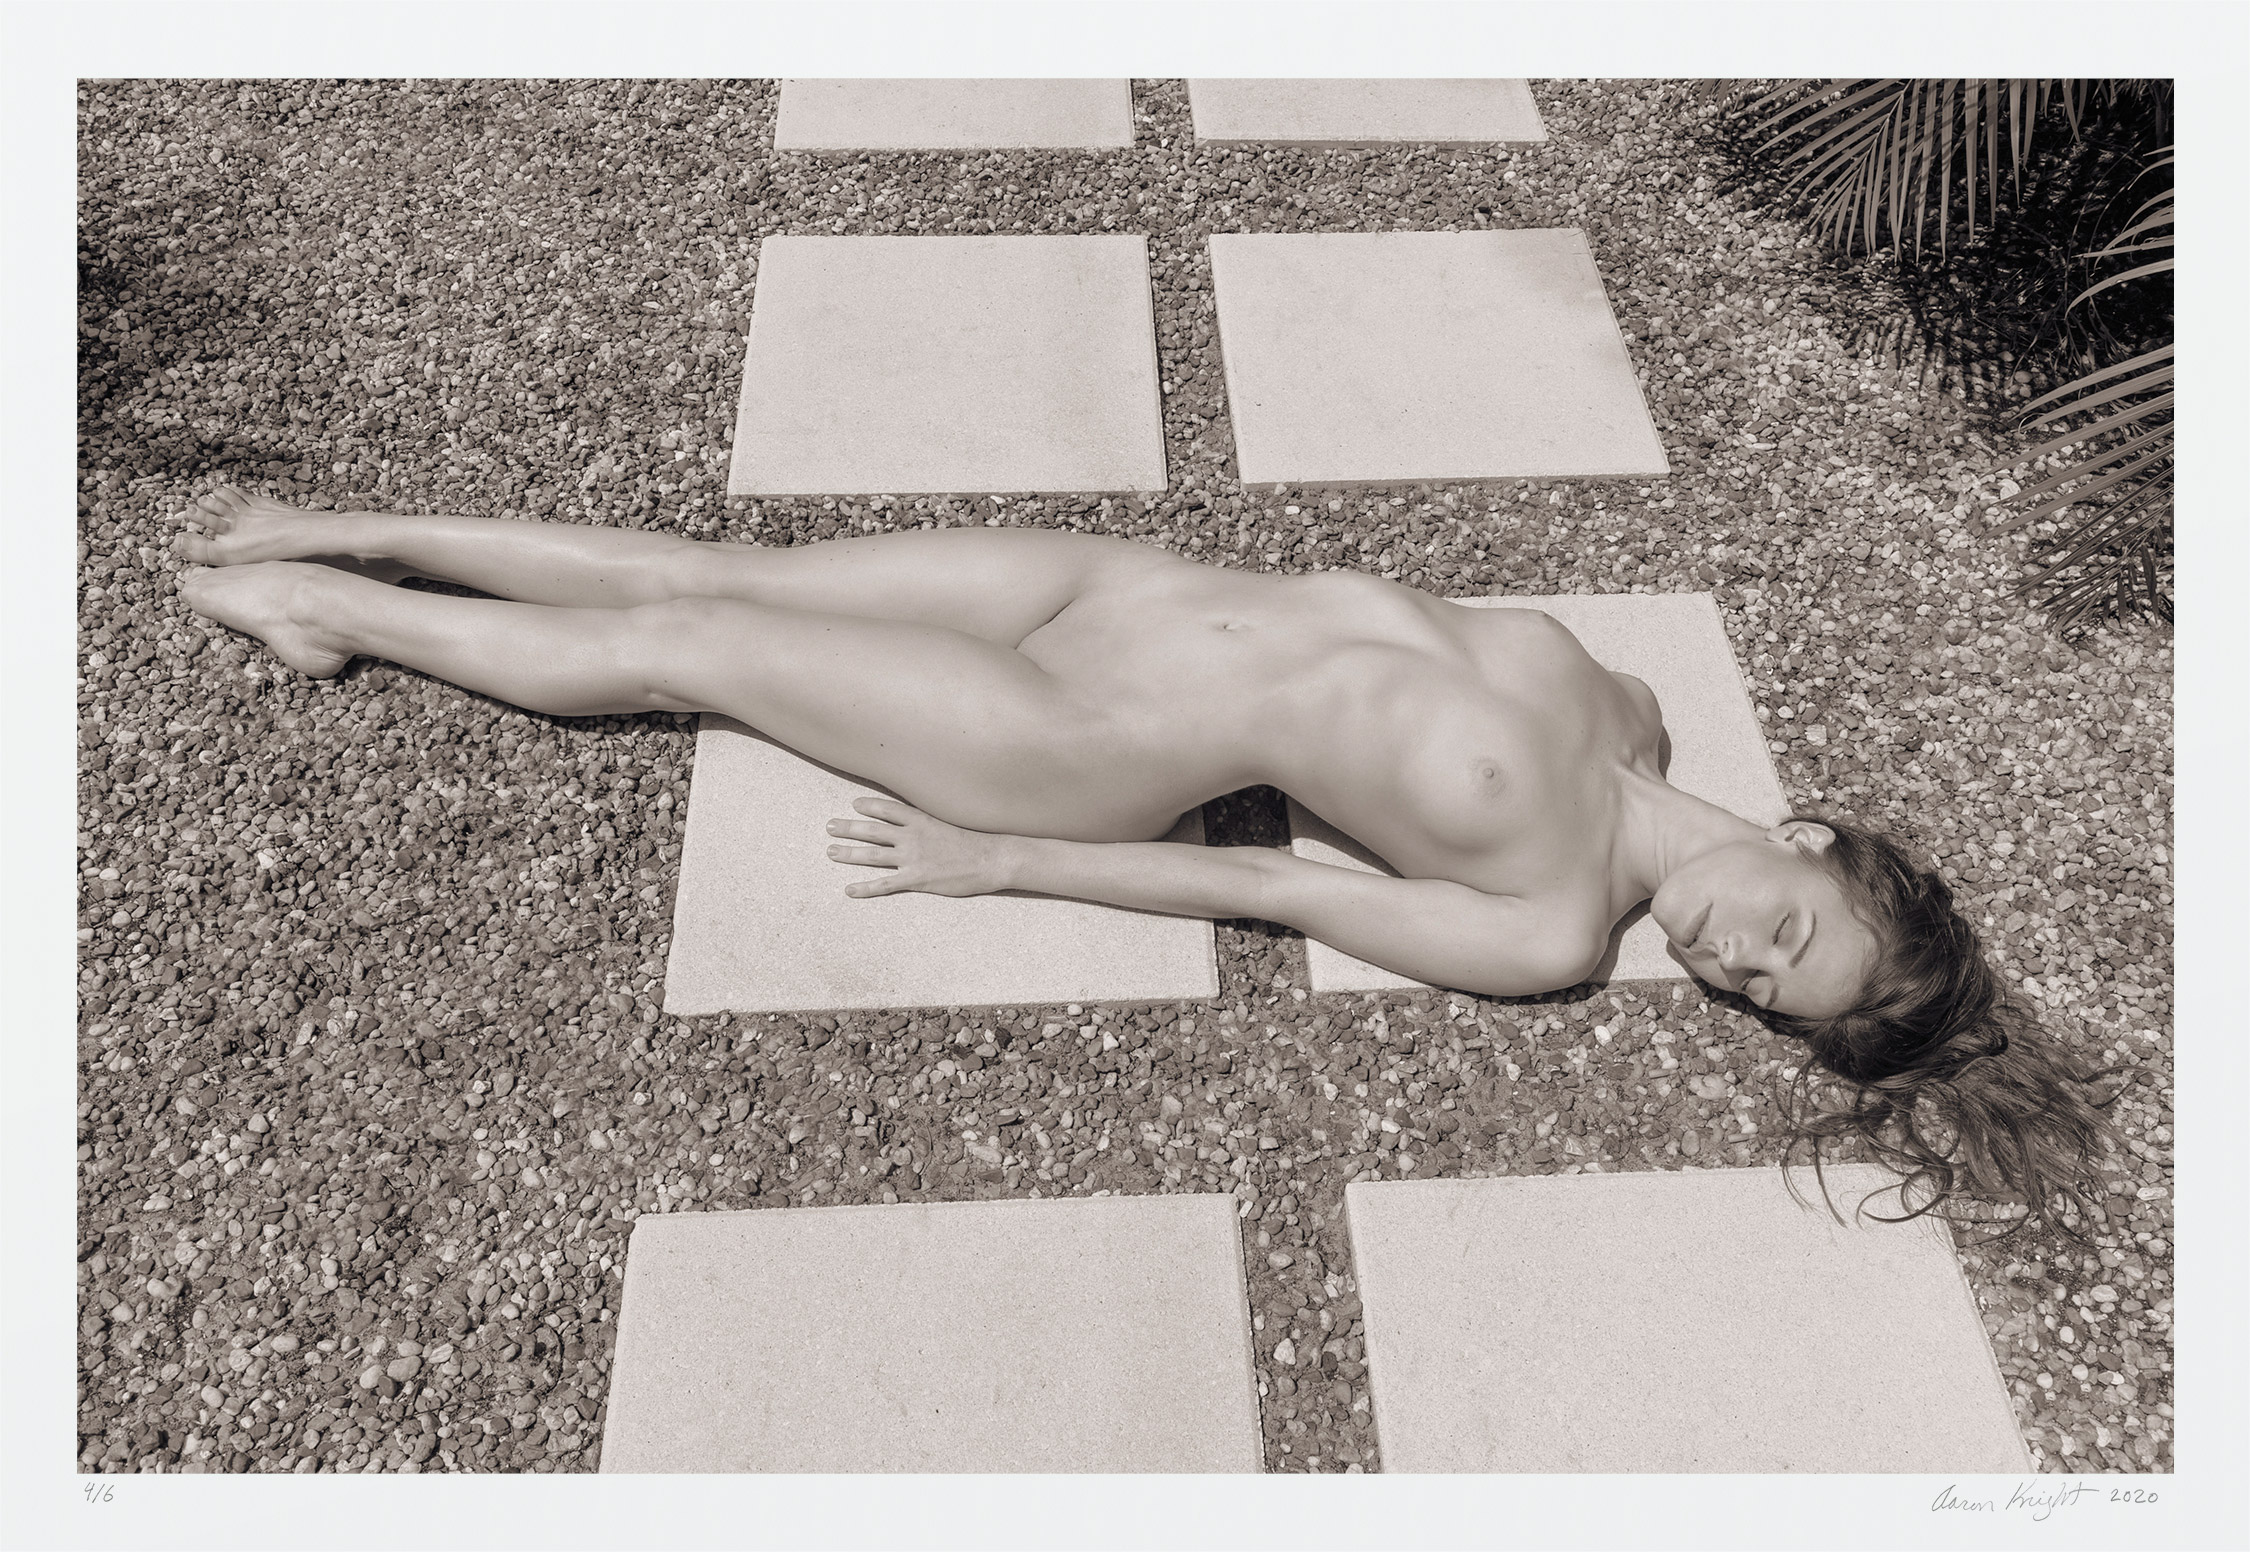 Black and white fine art nude photography. Limited edition.